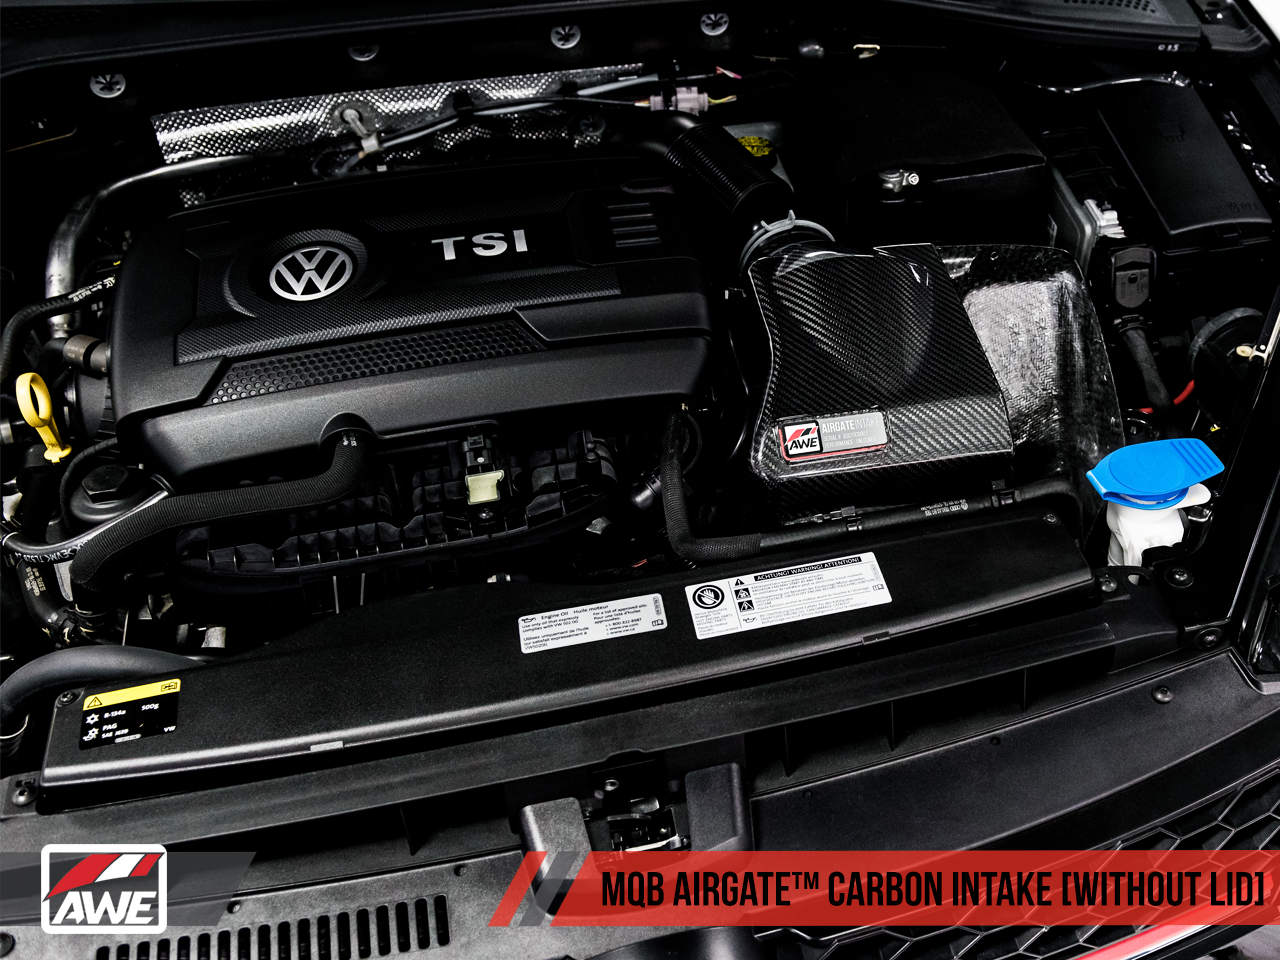 AWE AirGate™ Carbon Intake for Audi / VW MQB (1.8T / 2.0T) - Without Lid